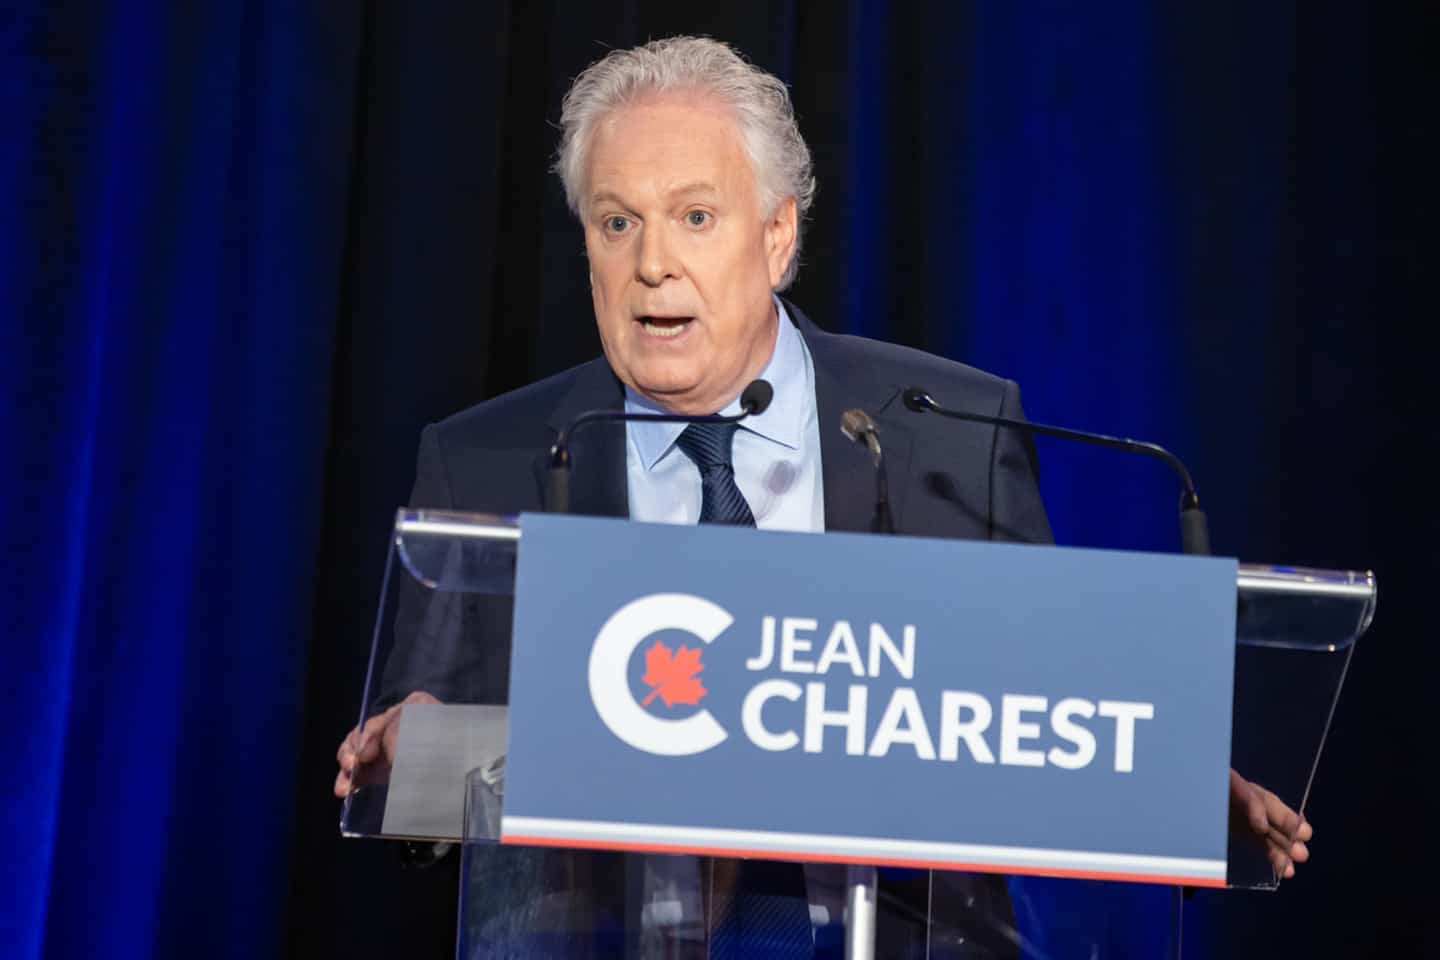 Disqualification of Patrick Brown: the path narrows again for Jean Charest